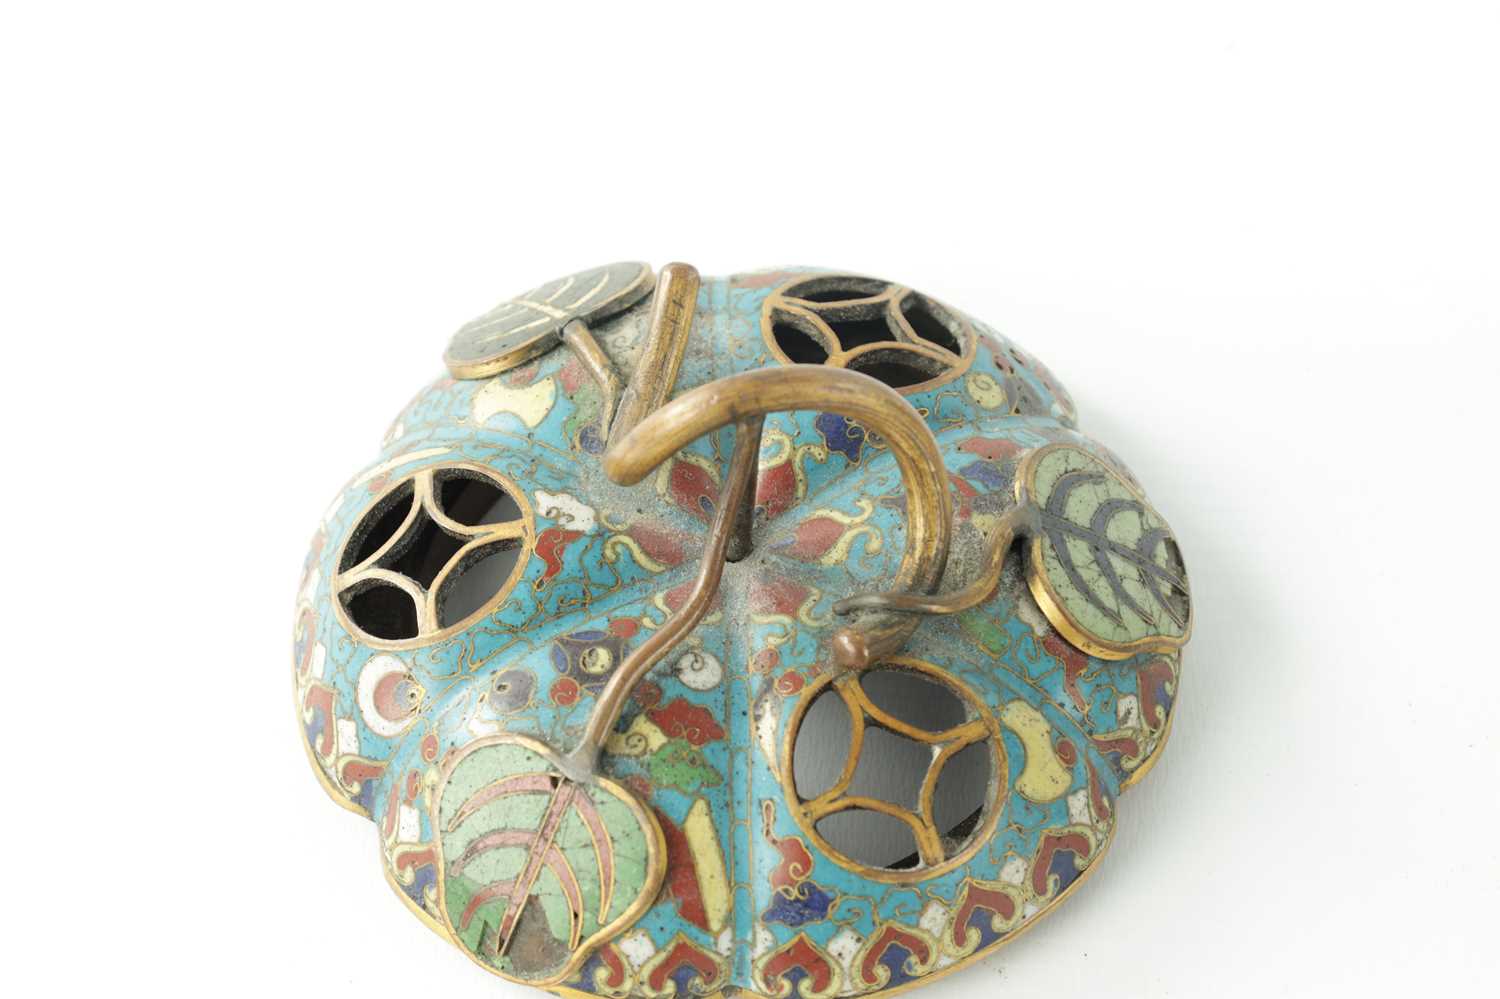 A GOOD EARLY 19TH CENTURY CHINESE CLOISONNÉ INCENSE BURNER - Image 6 of 8